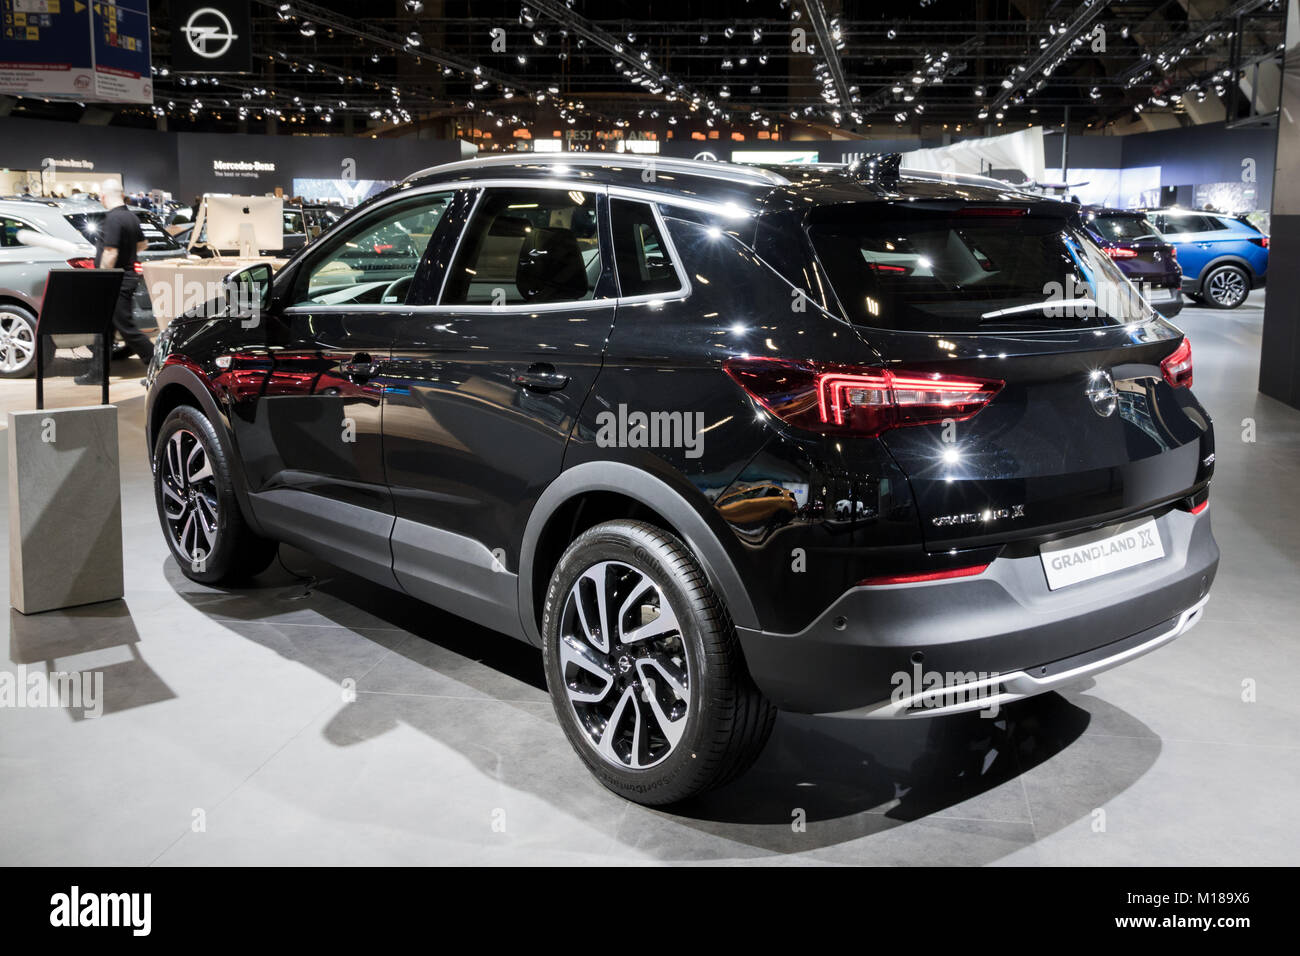 BRUSSELS - JAN 10, 2018: Opel Grandland X new SUV car shown at the Brussels  Motor Show Stock Photo - Alamy